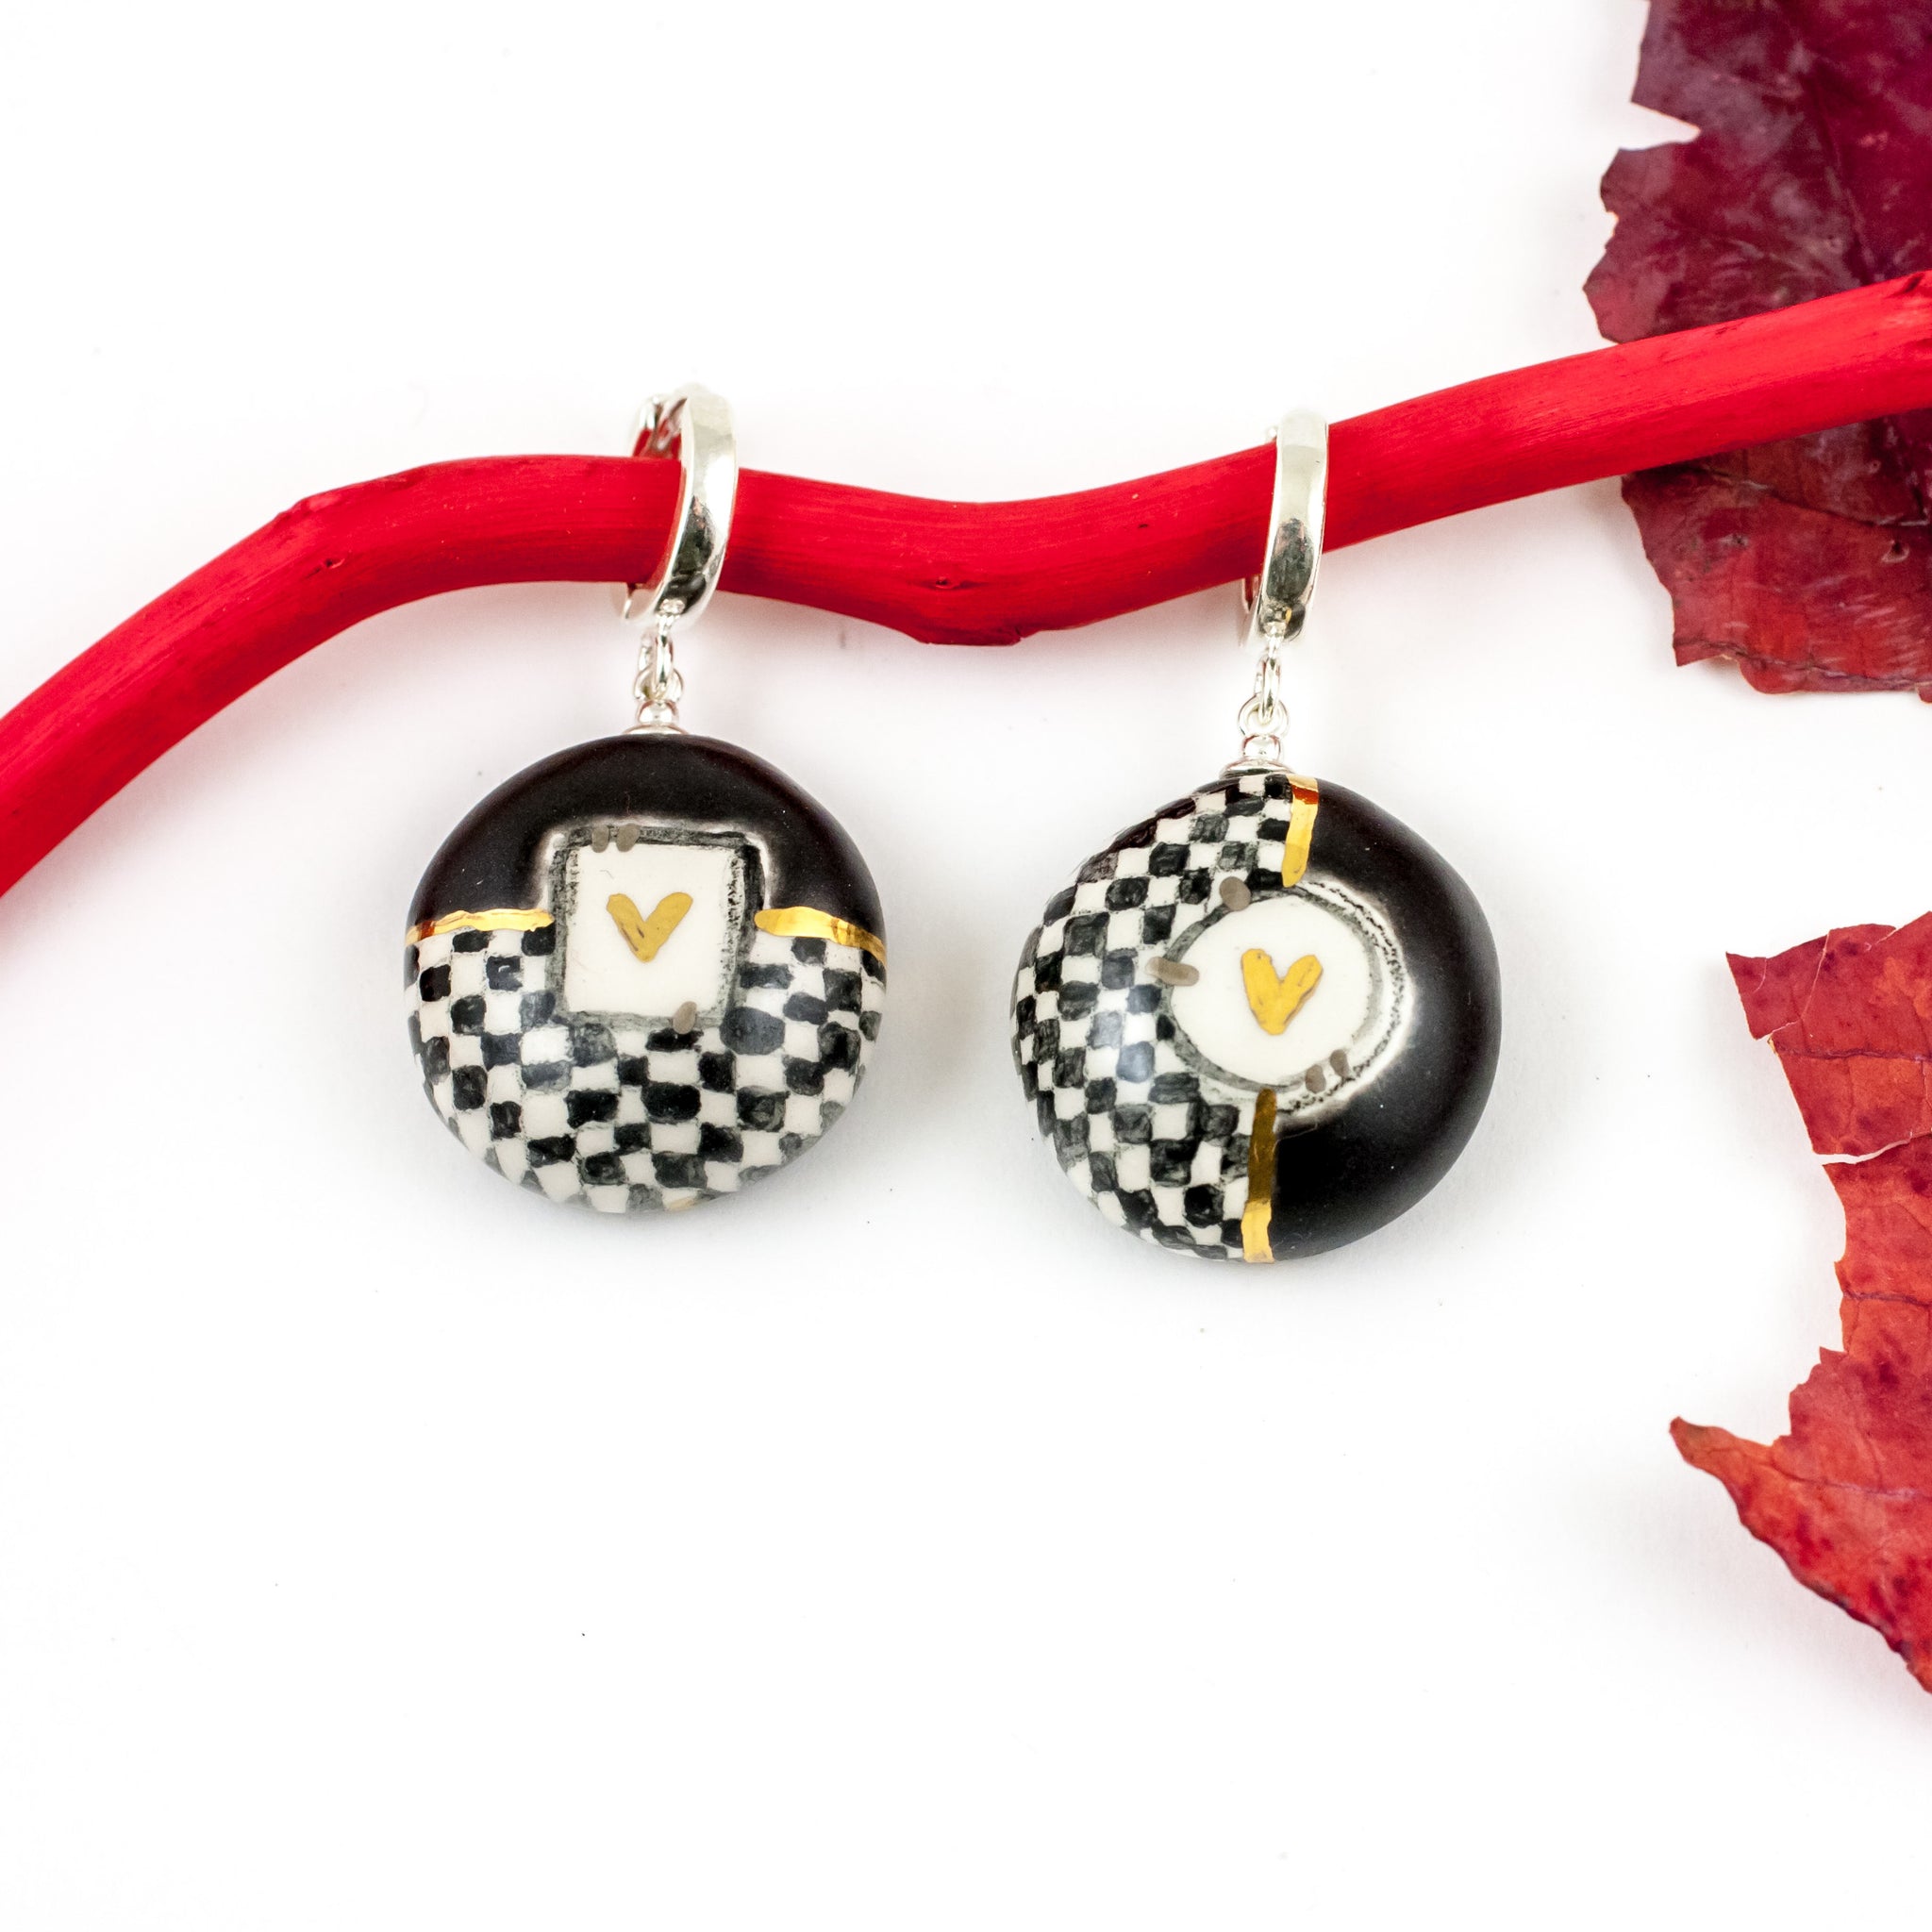 Round checked dangle earrings with hearts